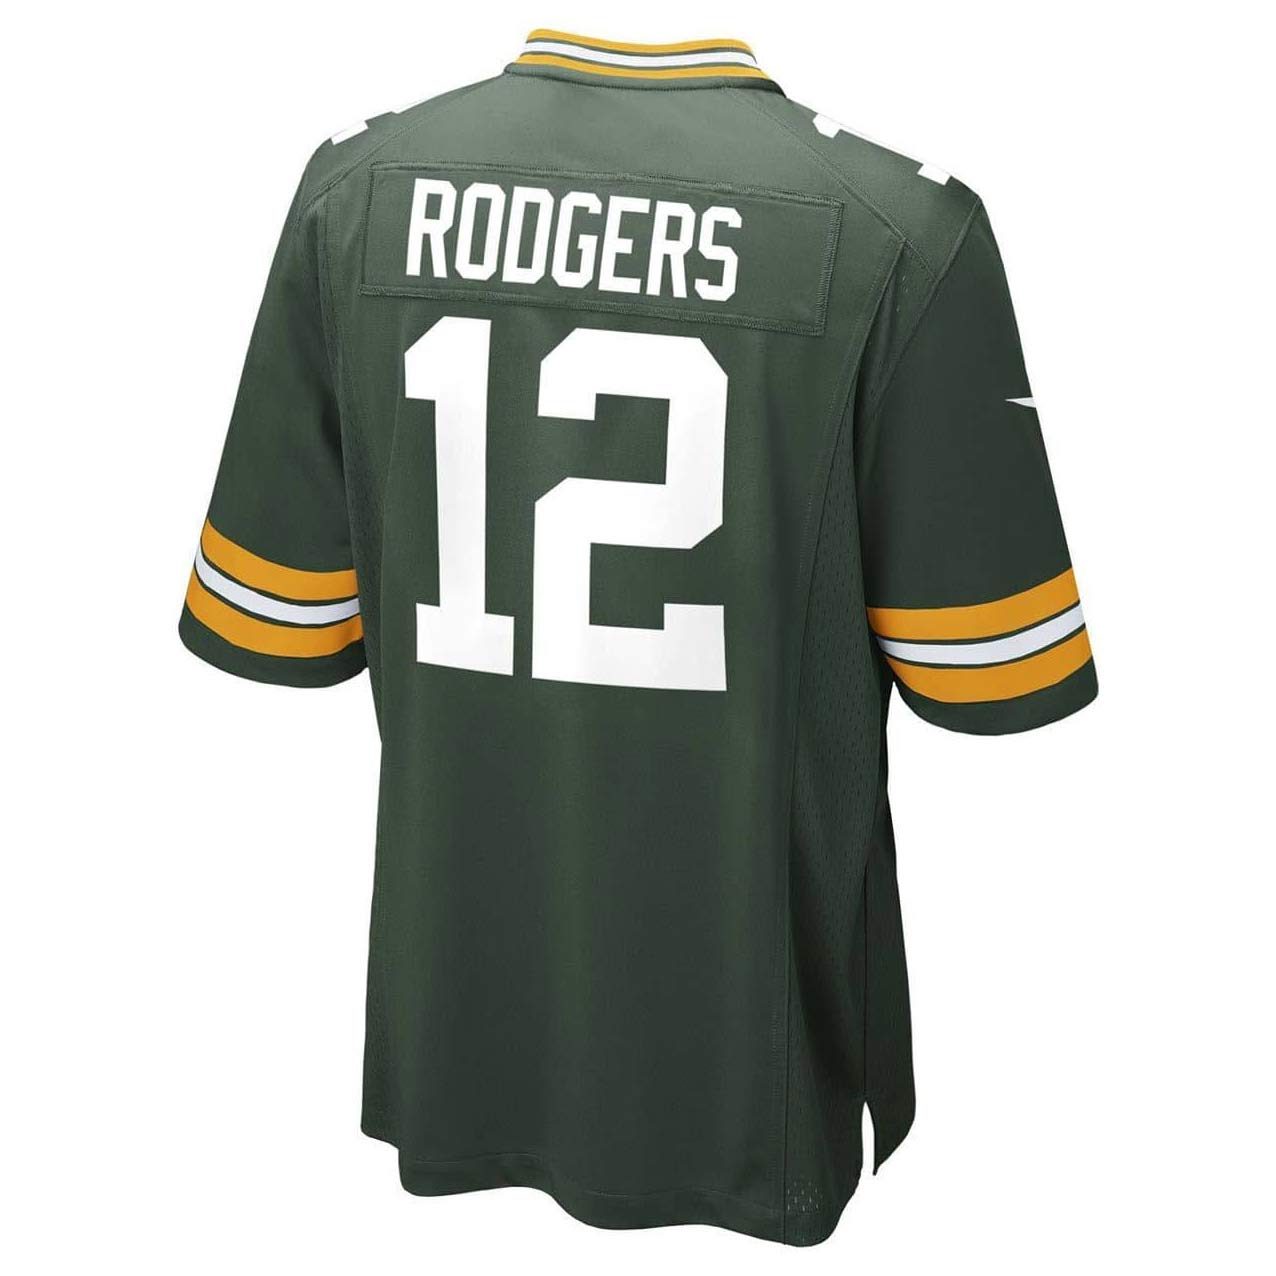 NIKE PACKERS RODGERS 12 HOME JERSEY